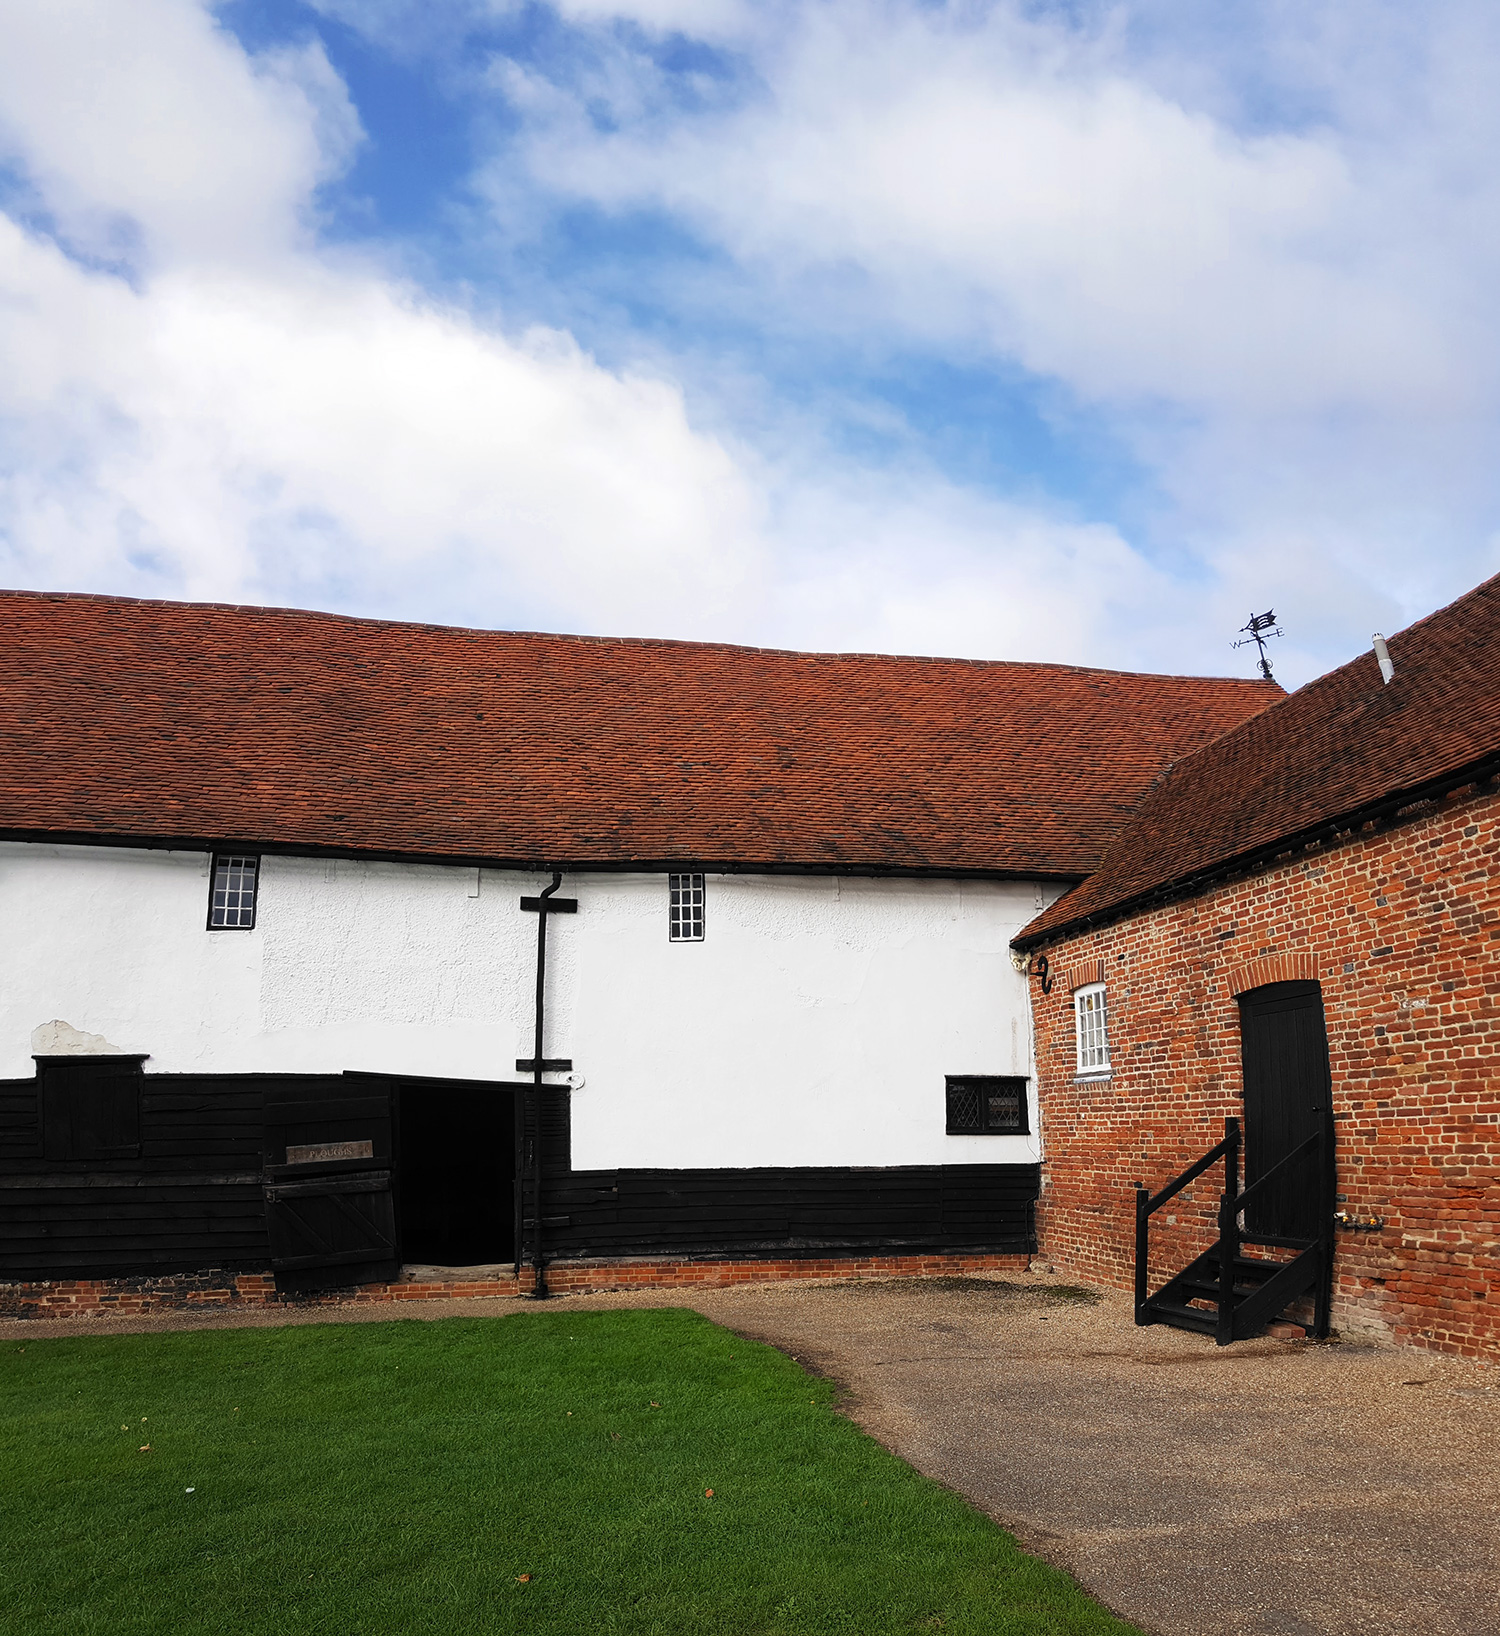 Apple Day at Cressing Temple Barns